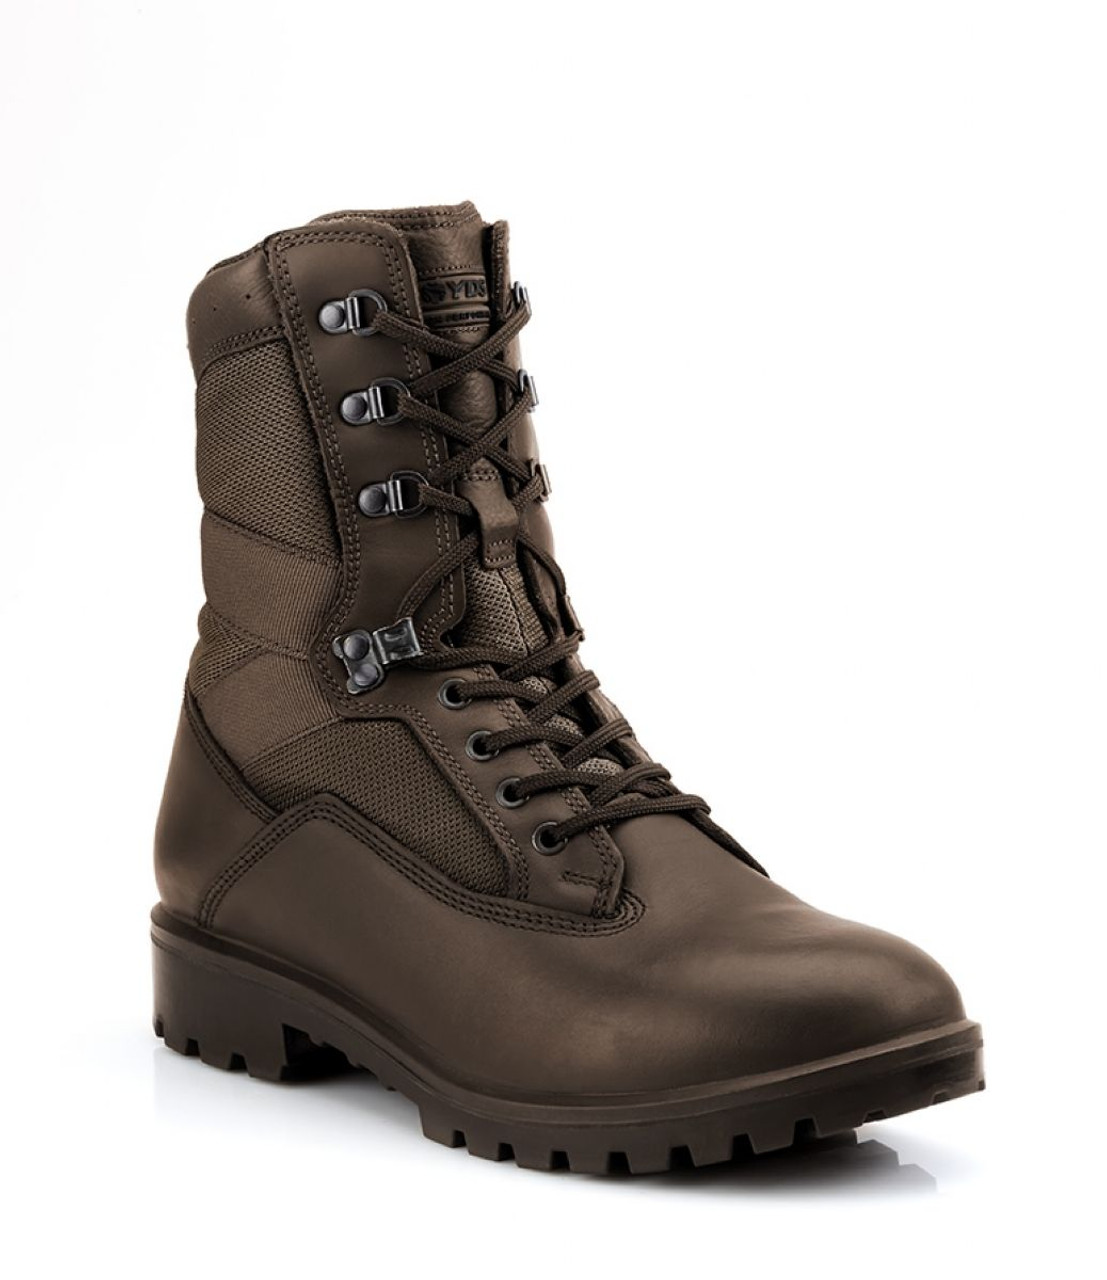 British Army Issue Yds Combat Brown Boot